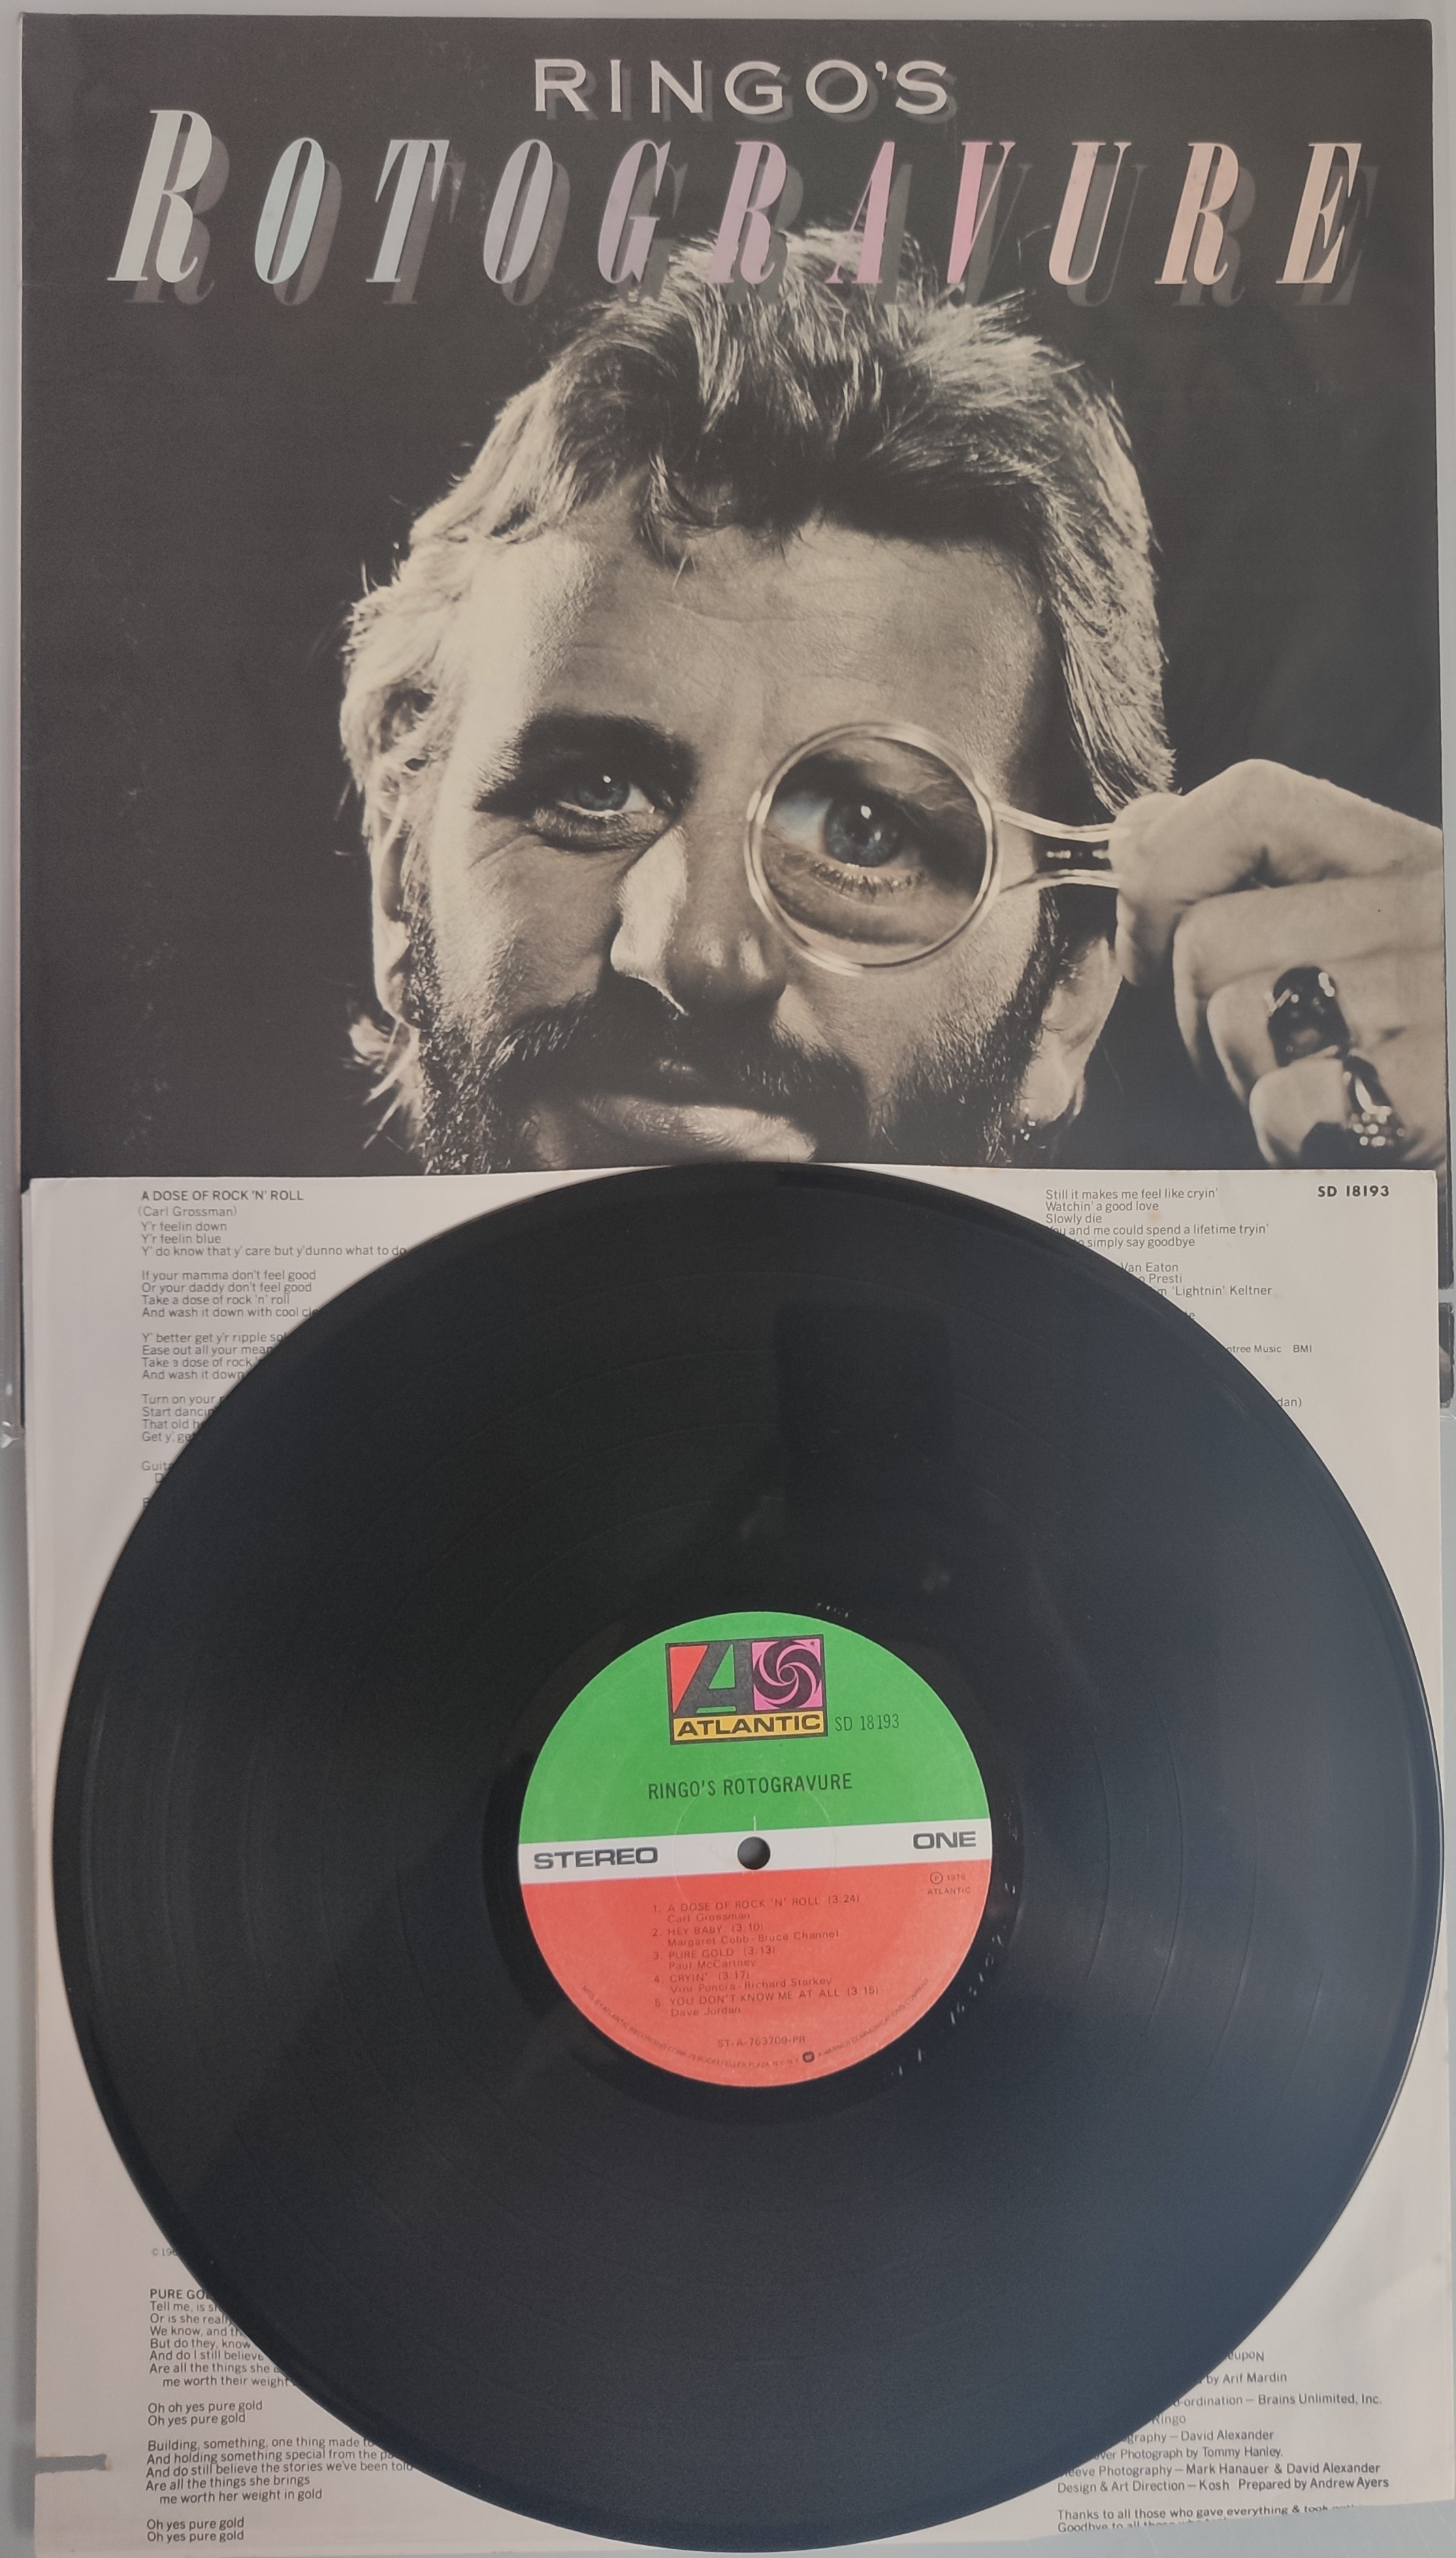 A Collection of 3 x Ringo Starr – Rotogravure Vinyl LP – 1976 UK Pressing and US First Pressings. - Image 4 of 5